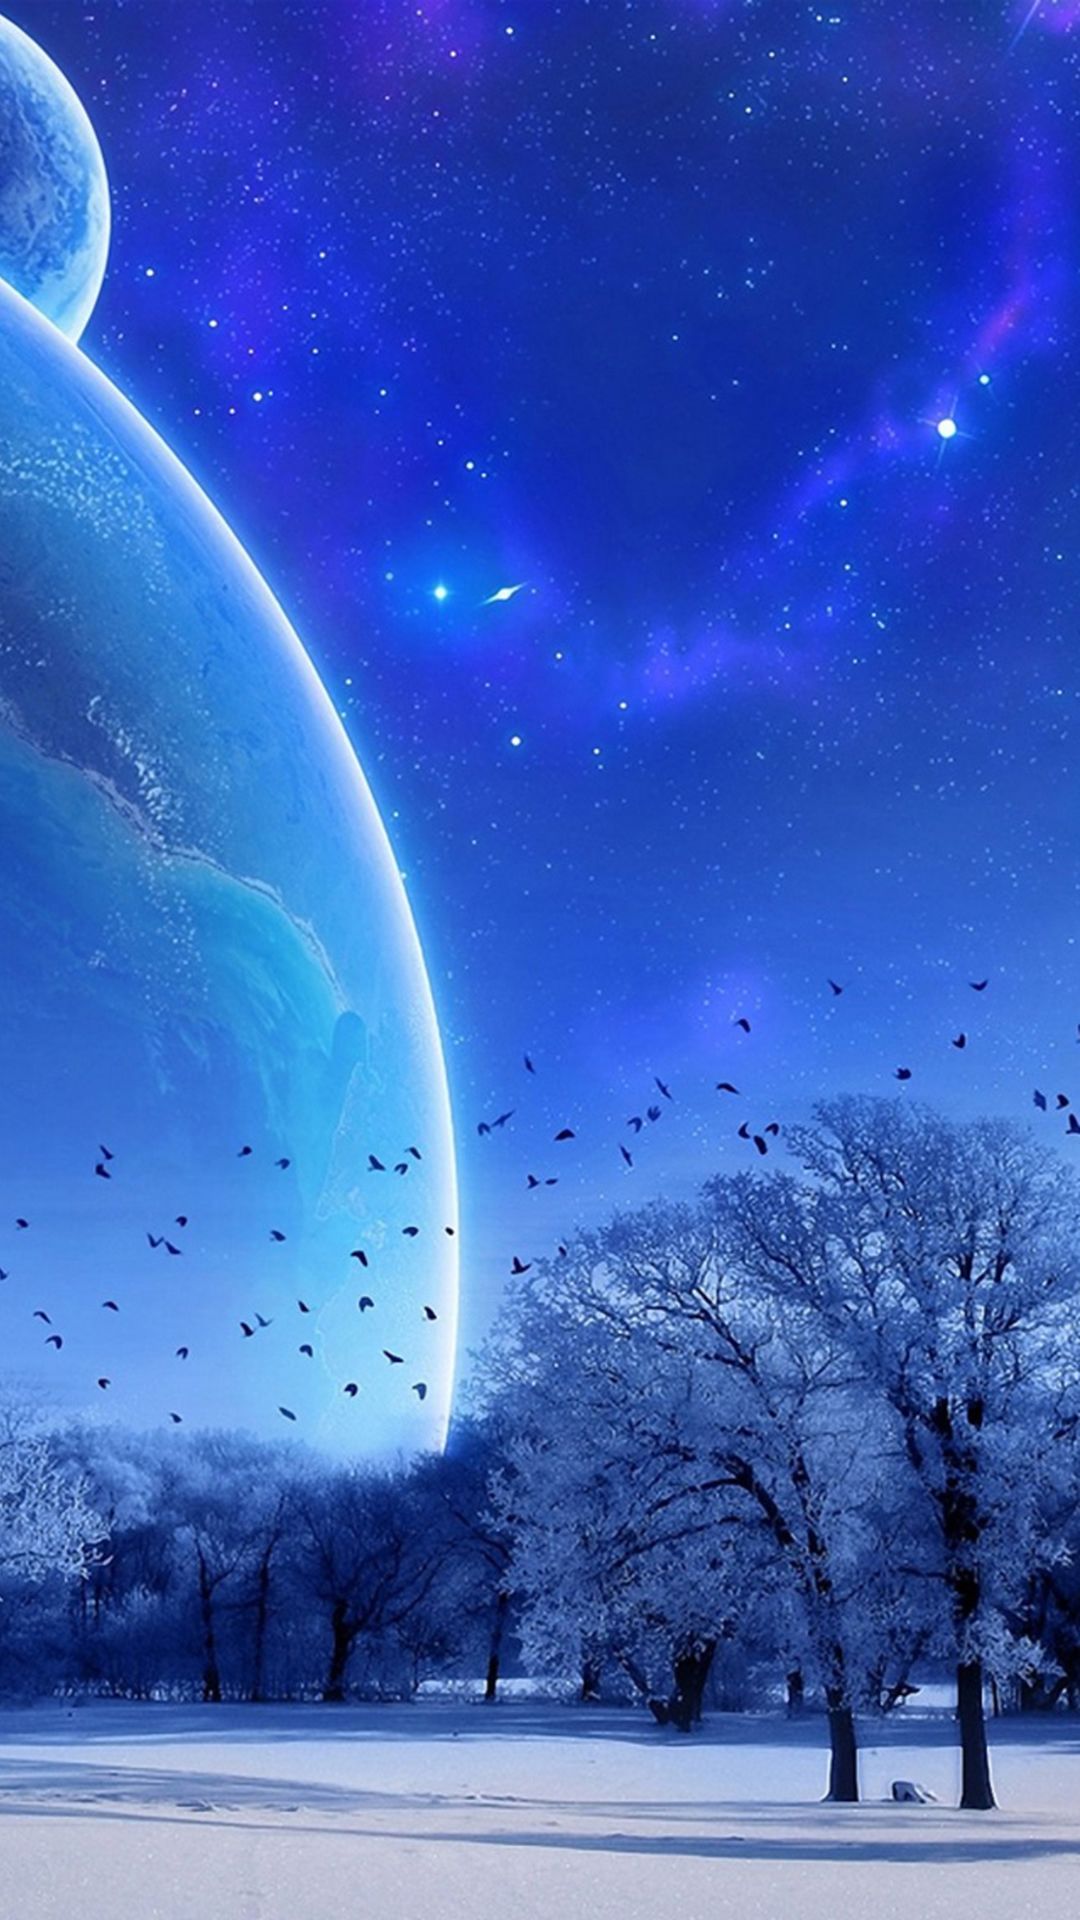 Fantasy Winter Skyscape Space View IPhone 6 Wallpaper Download. IPhone Wallpaper, IPad Wallpaper One St. Space Iphone Wallpaper, Skyscape, IPhone Wallpaper Sky